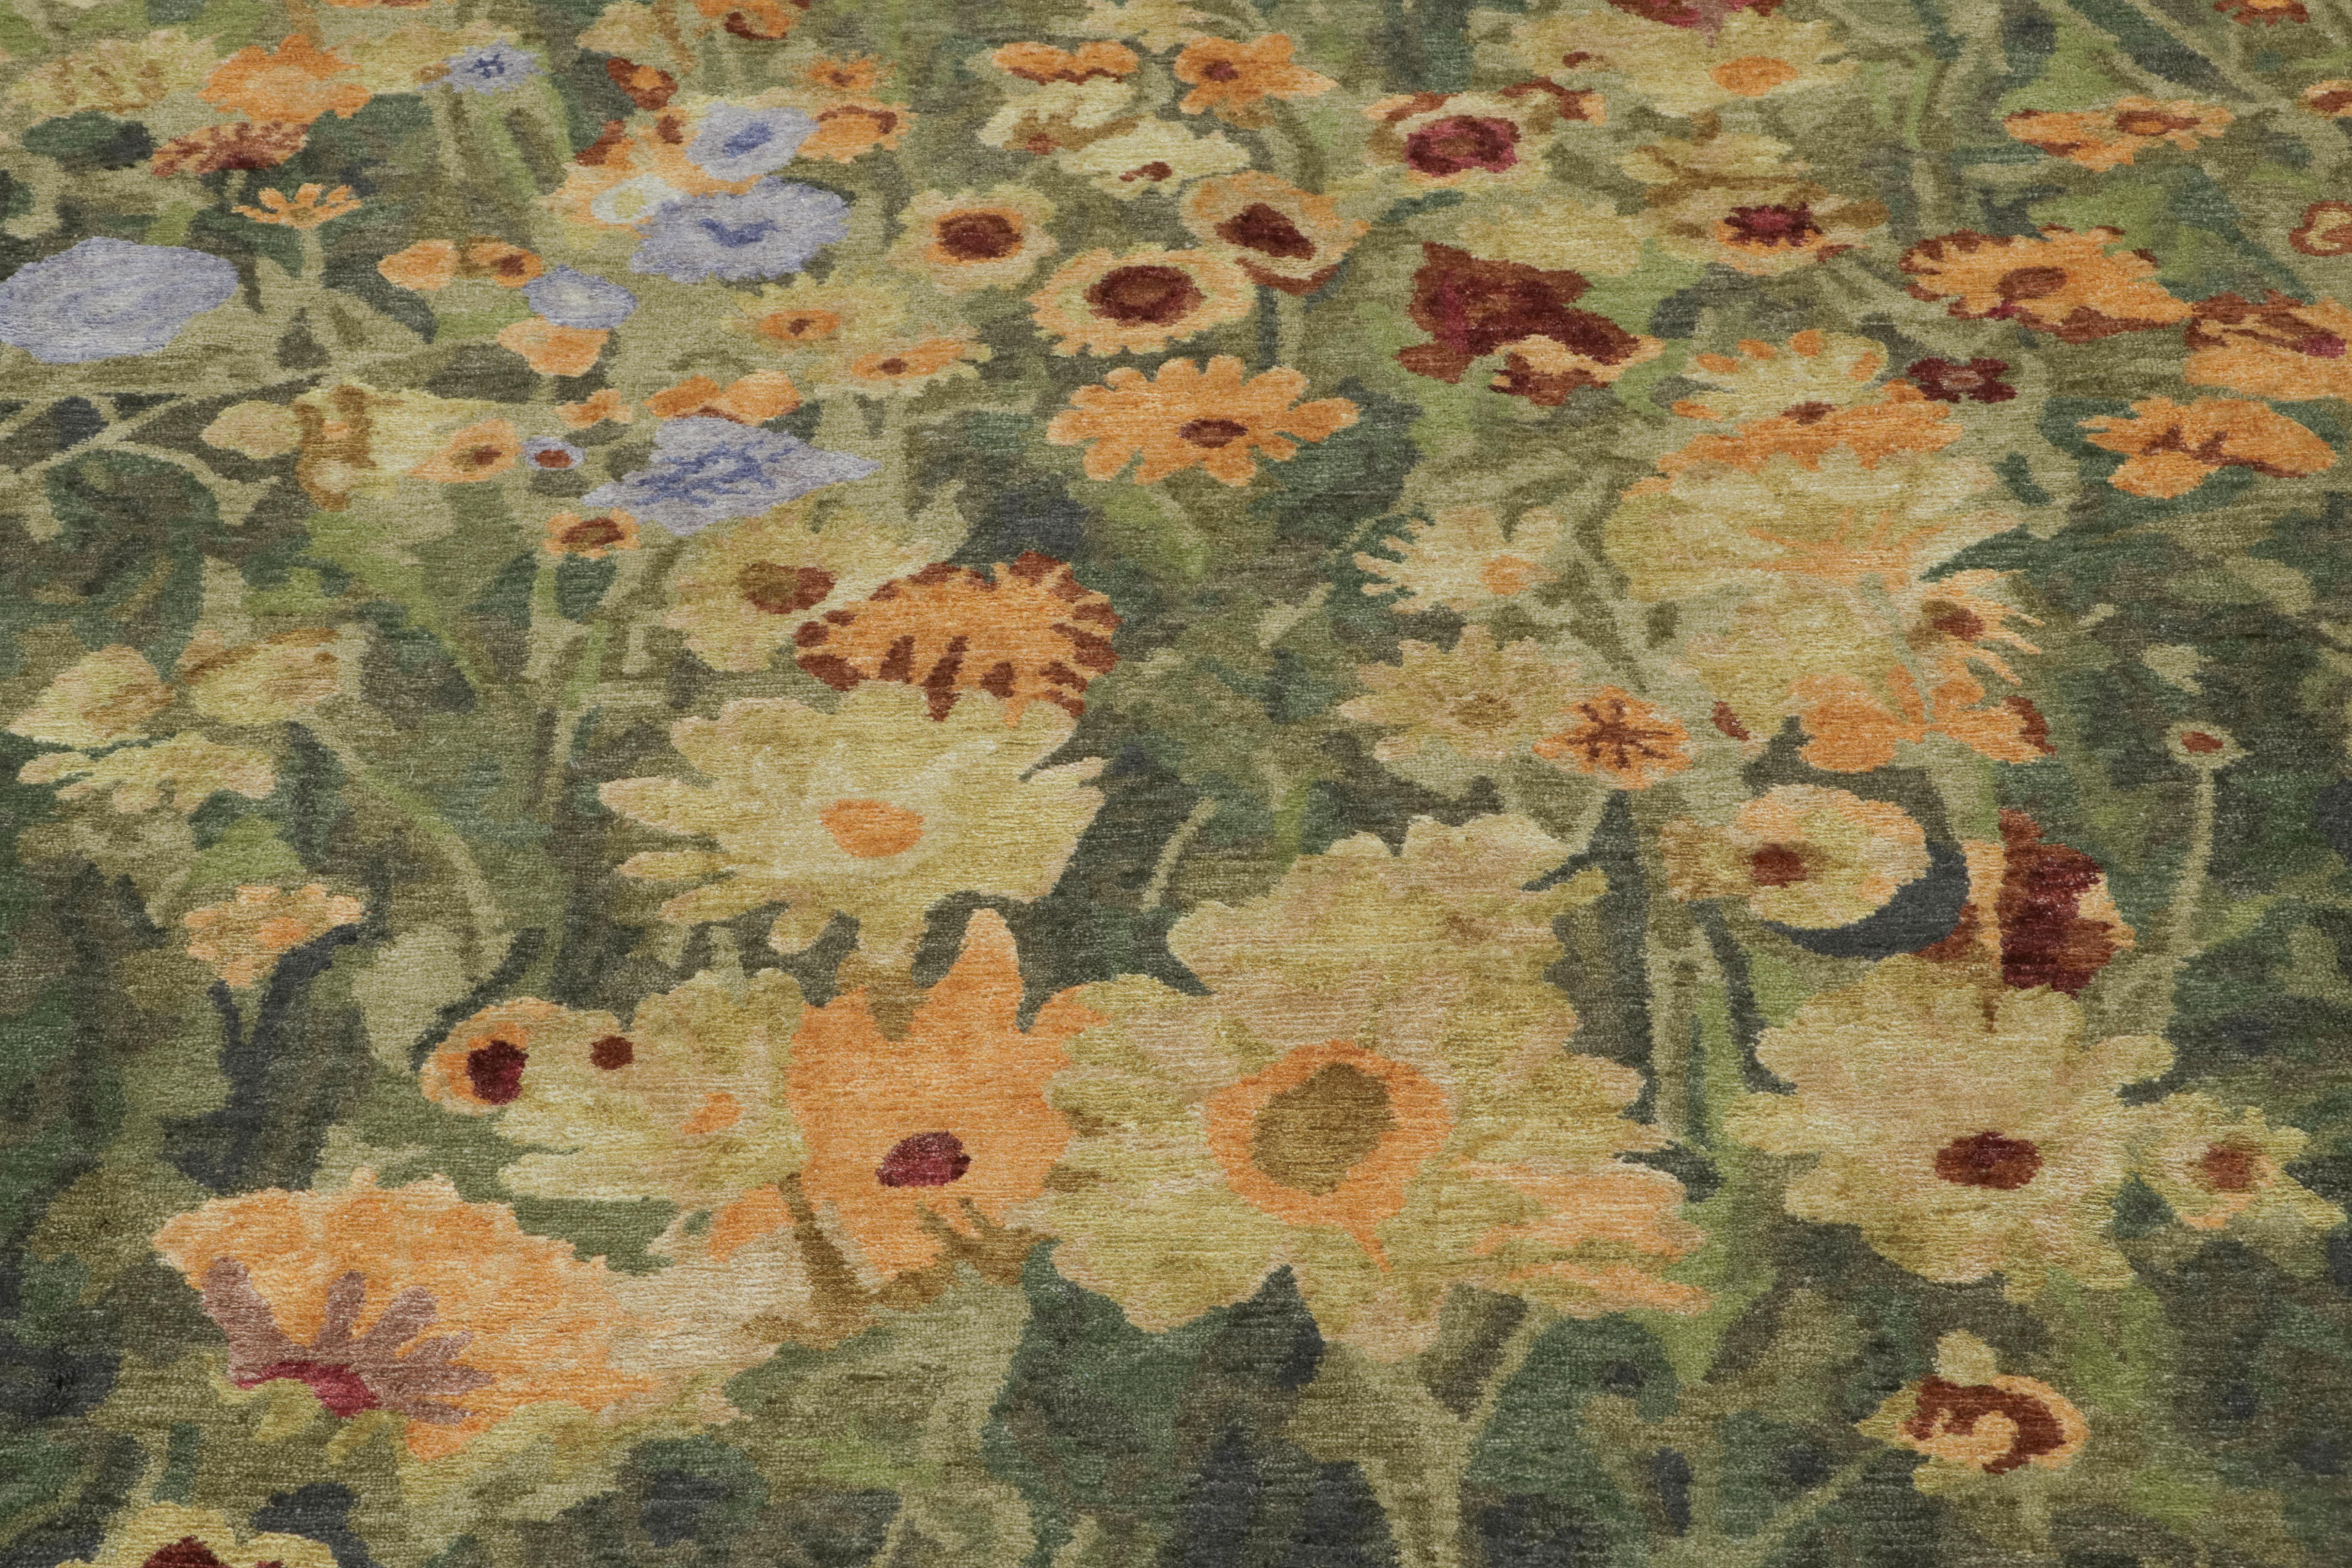 Hand-Knotted Rug & Kilim’s Botanical Rug in Green with Floral Patterns - “Summer Dream”  For Sale